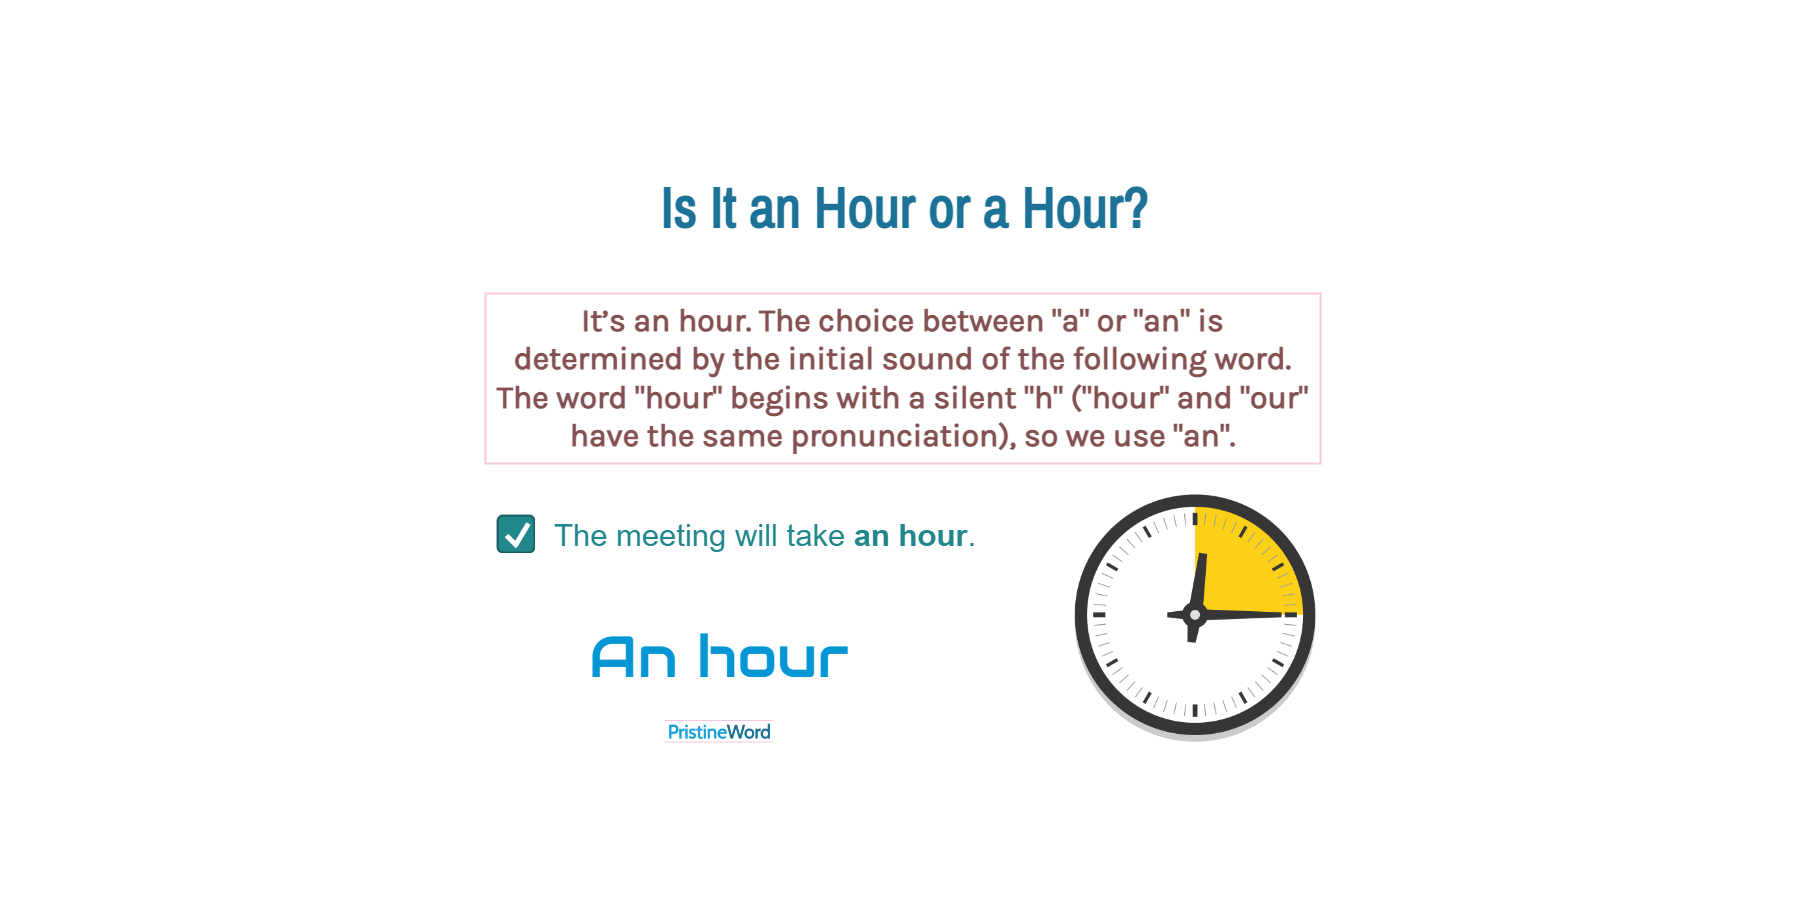 Is It an hour or a hour?